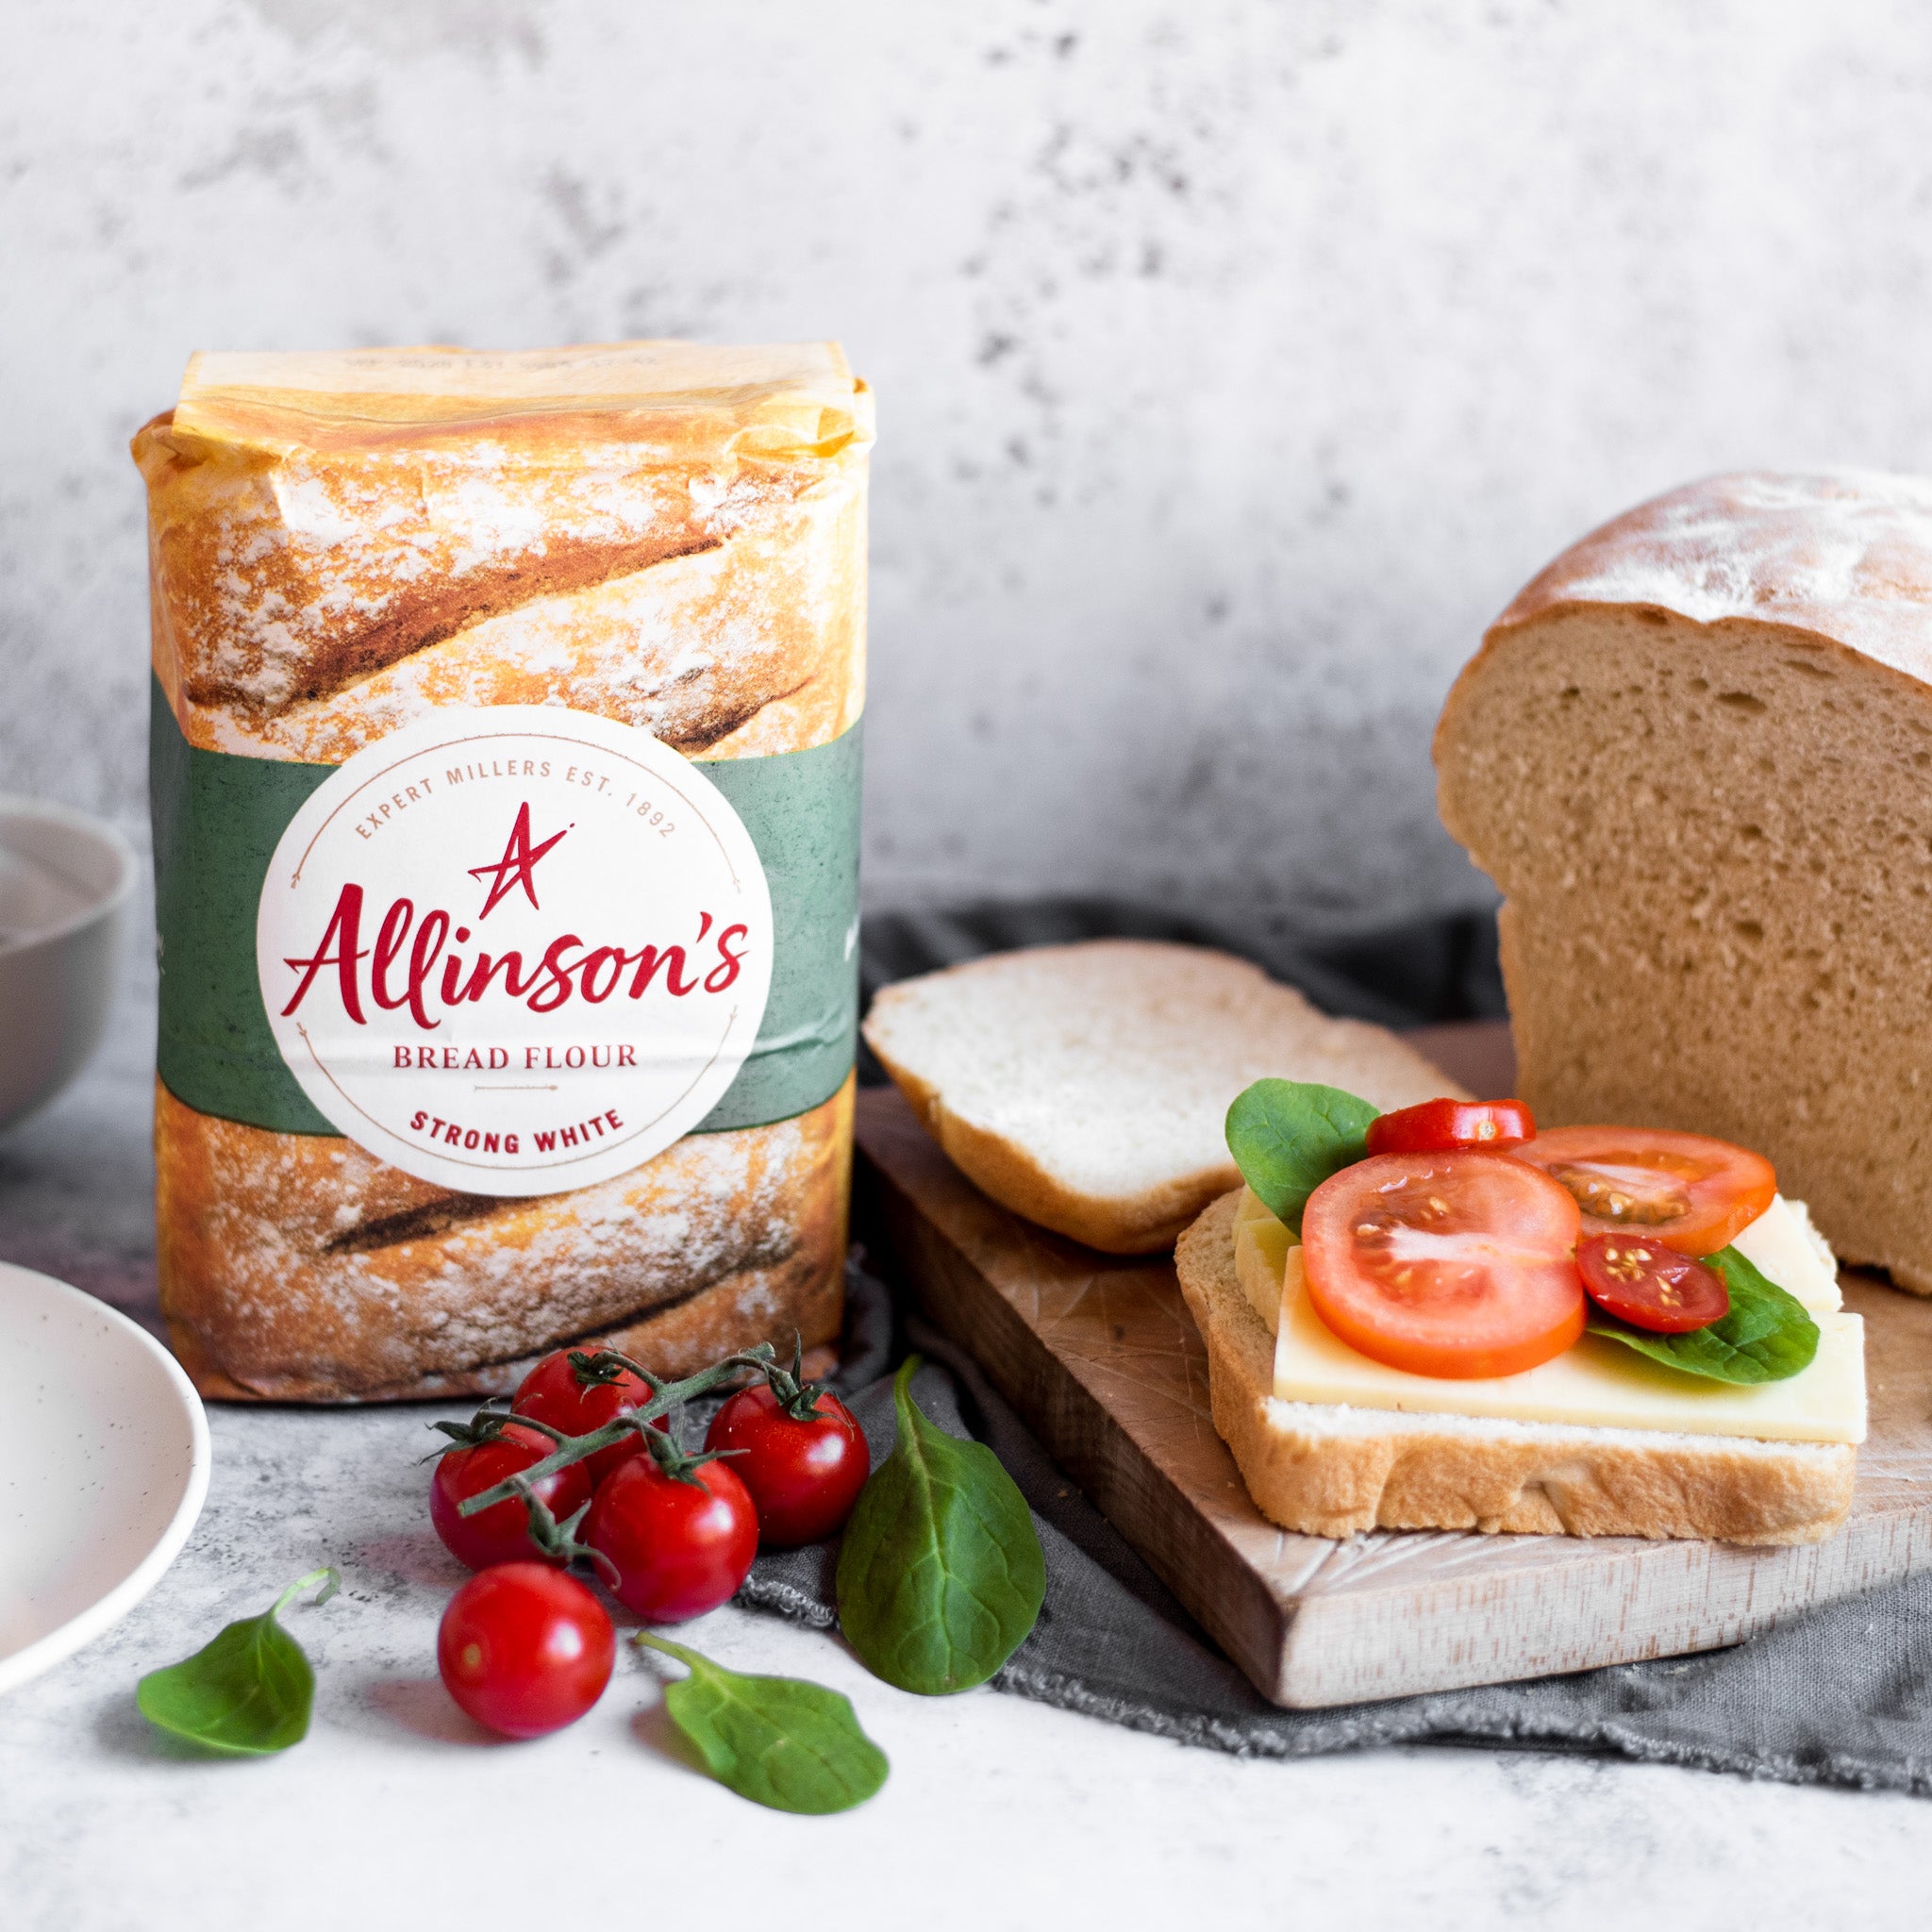 Allinsons-Crusty-White-Loaf-1-1-Baking-Mad-3.jpg